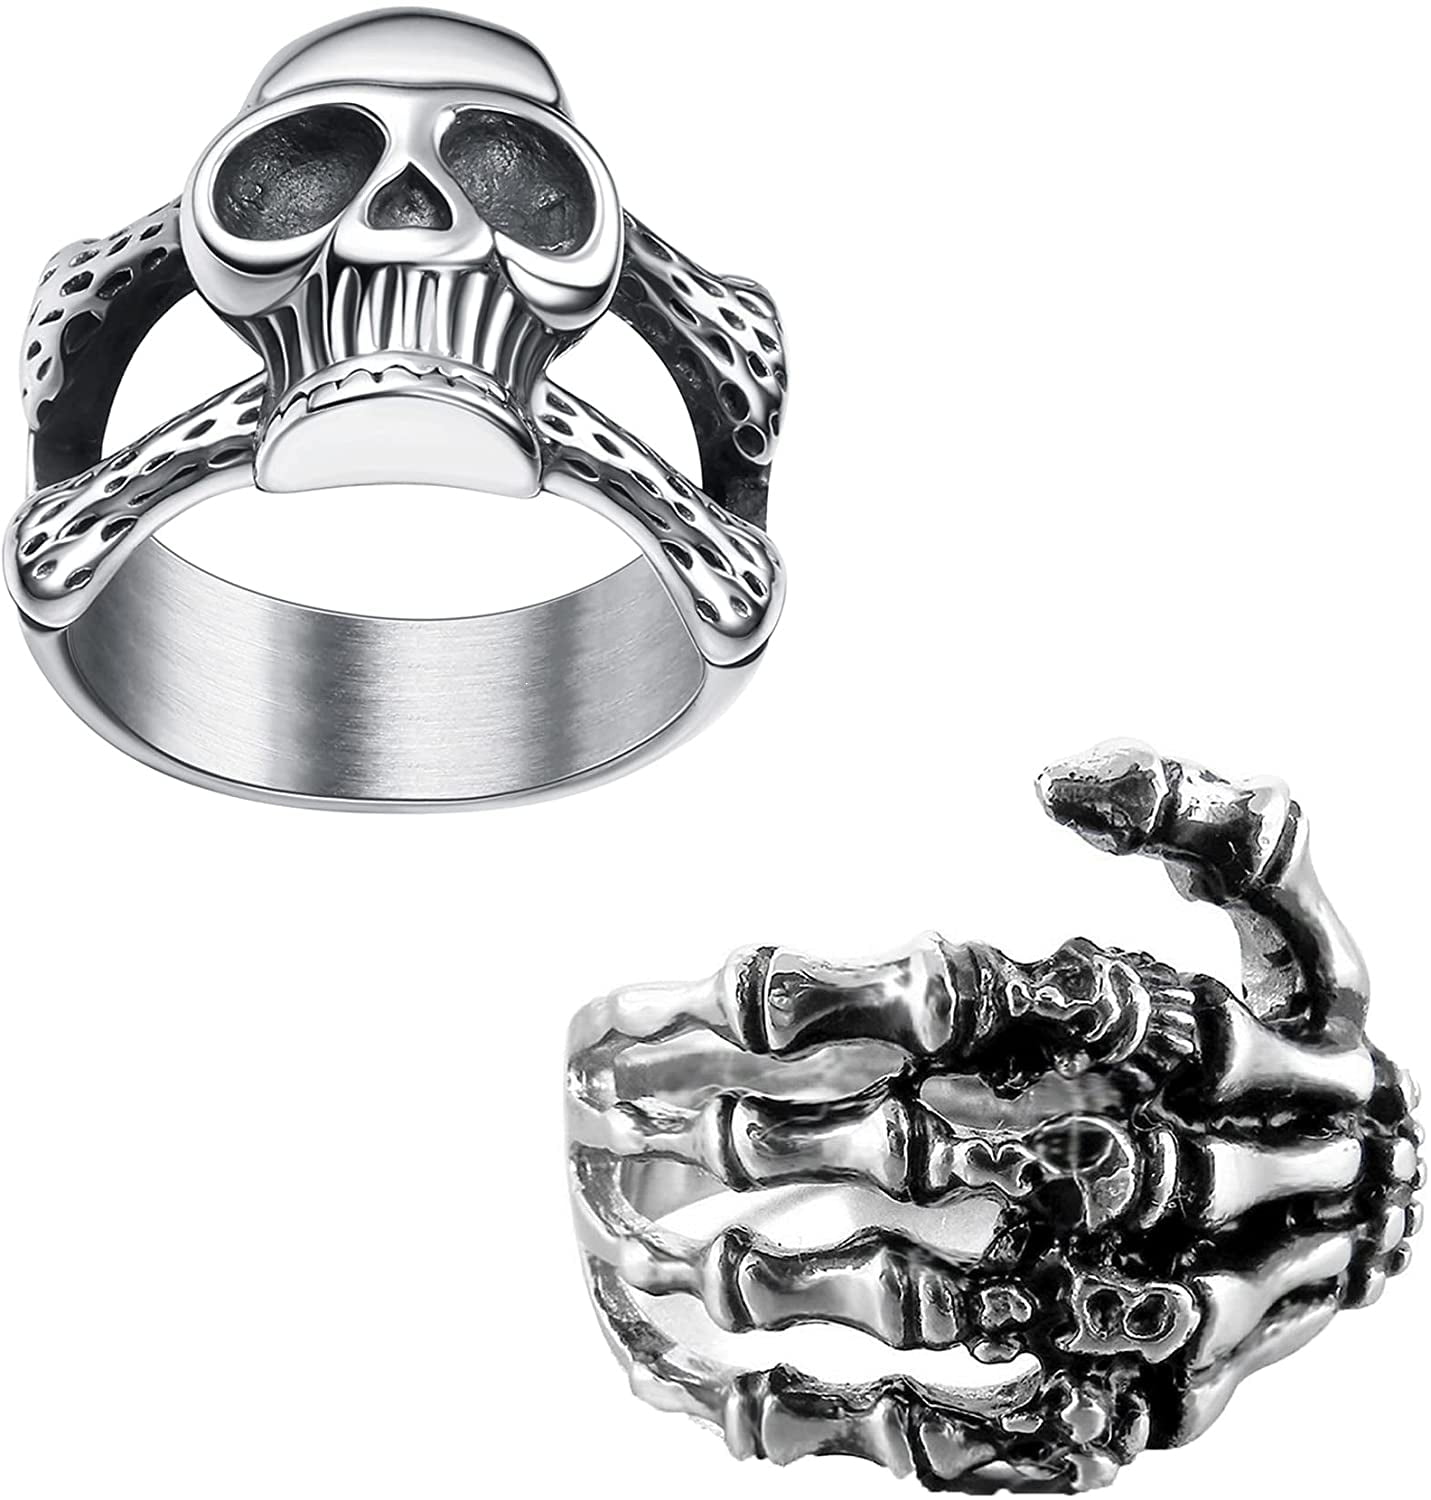 Silver bikies ring stainless steel crystal skull band soft gothic punk 